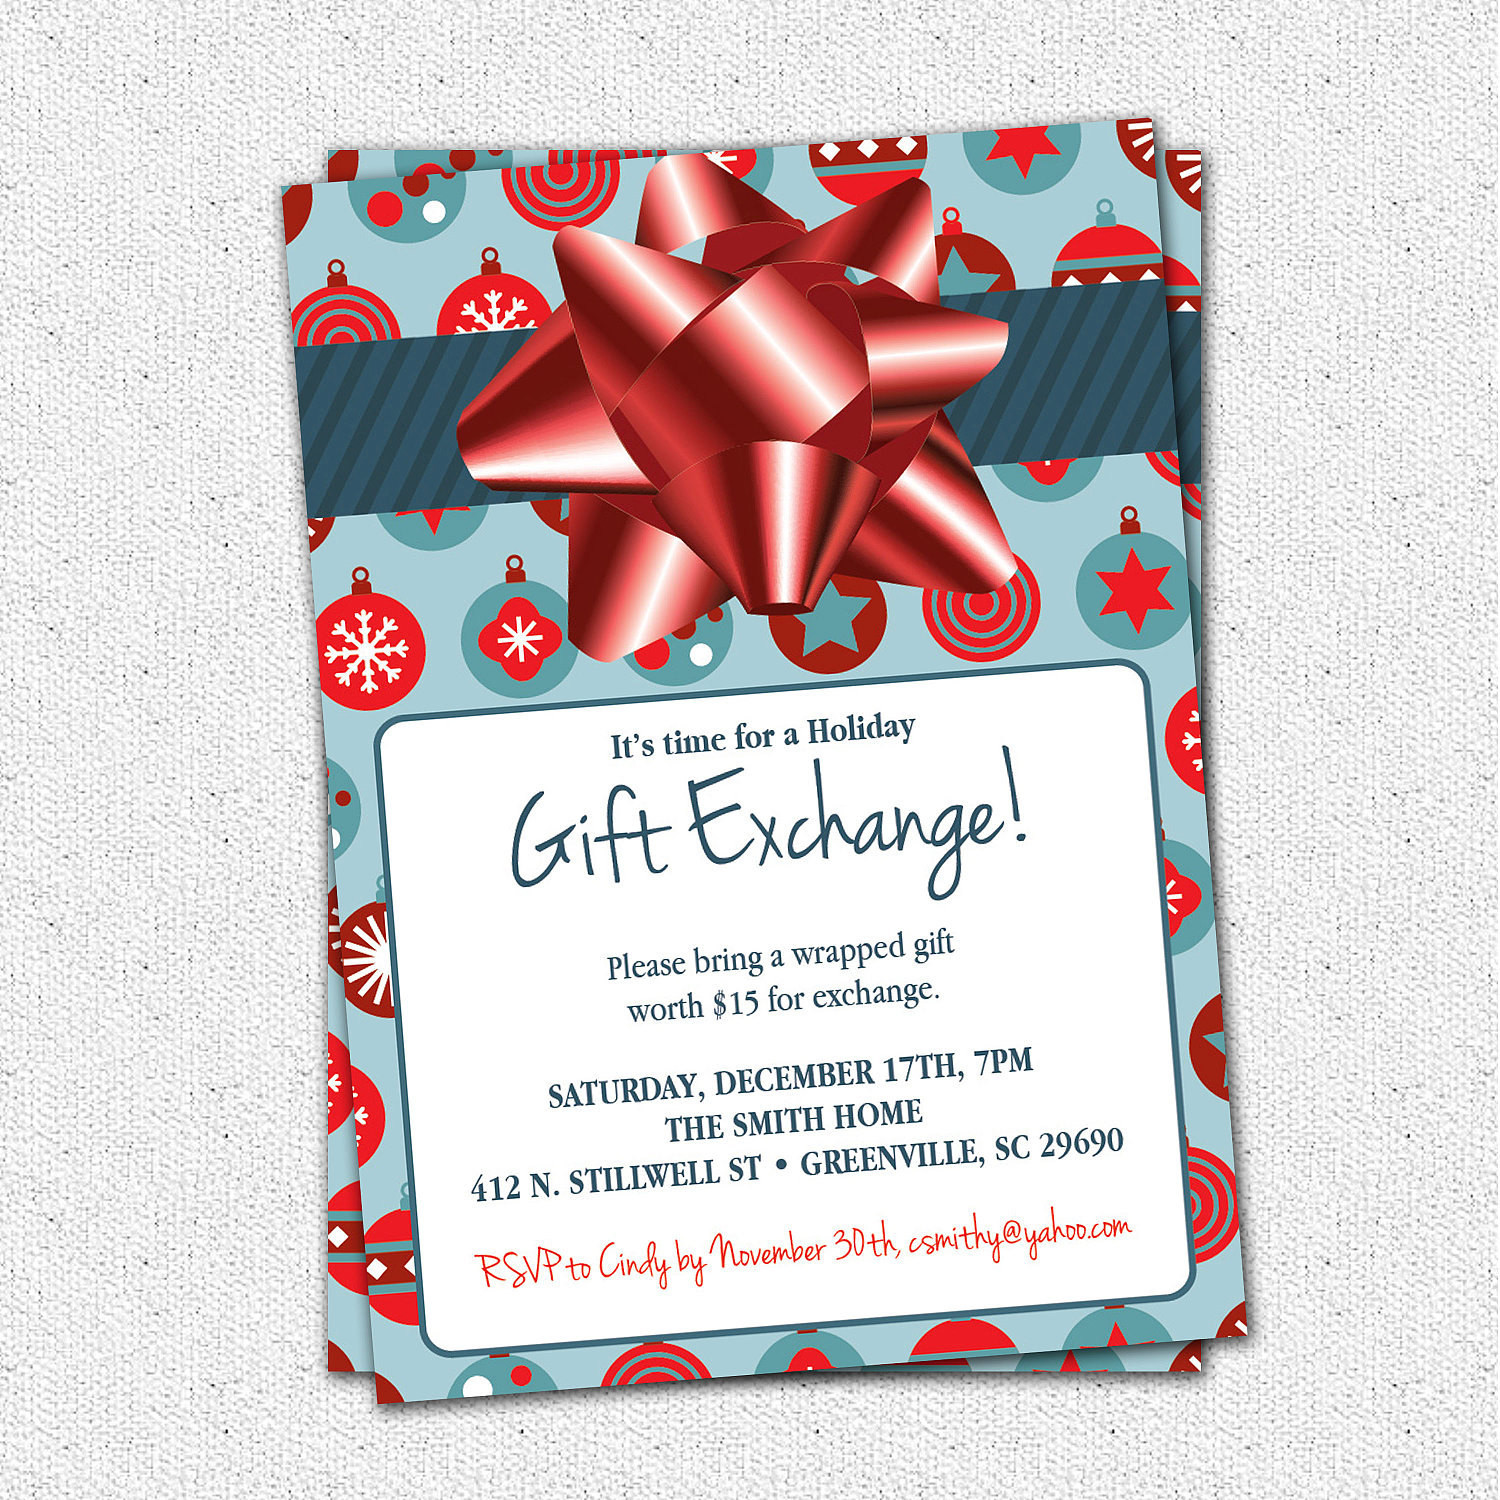 Office Christmas Party Gift Exchange Ideas
 Christmas Holiday Gift Exchange Party Invitation Blue or Green